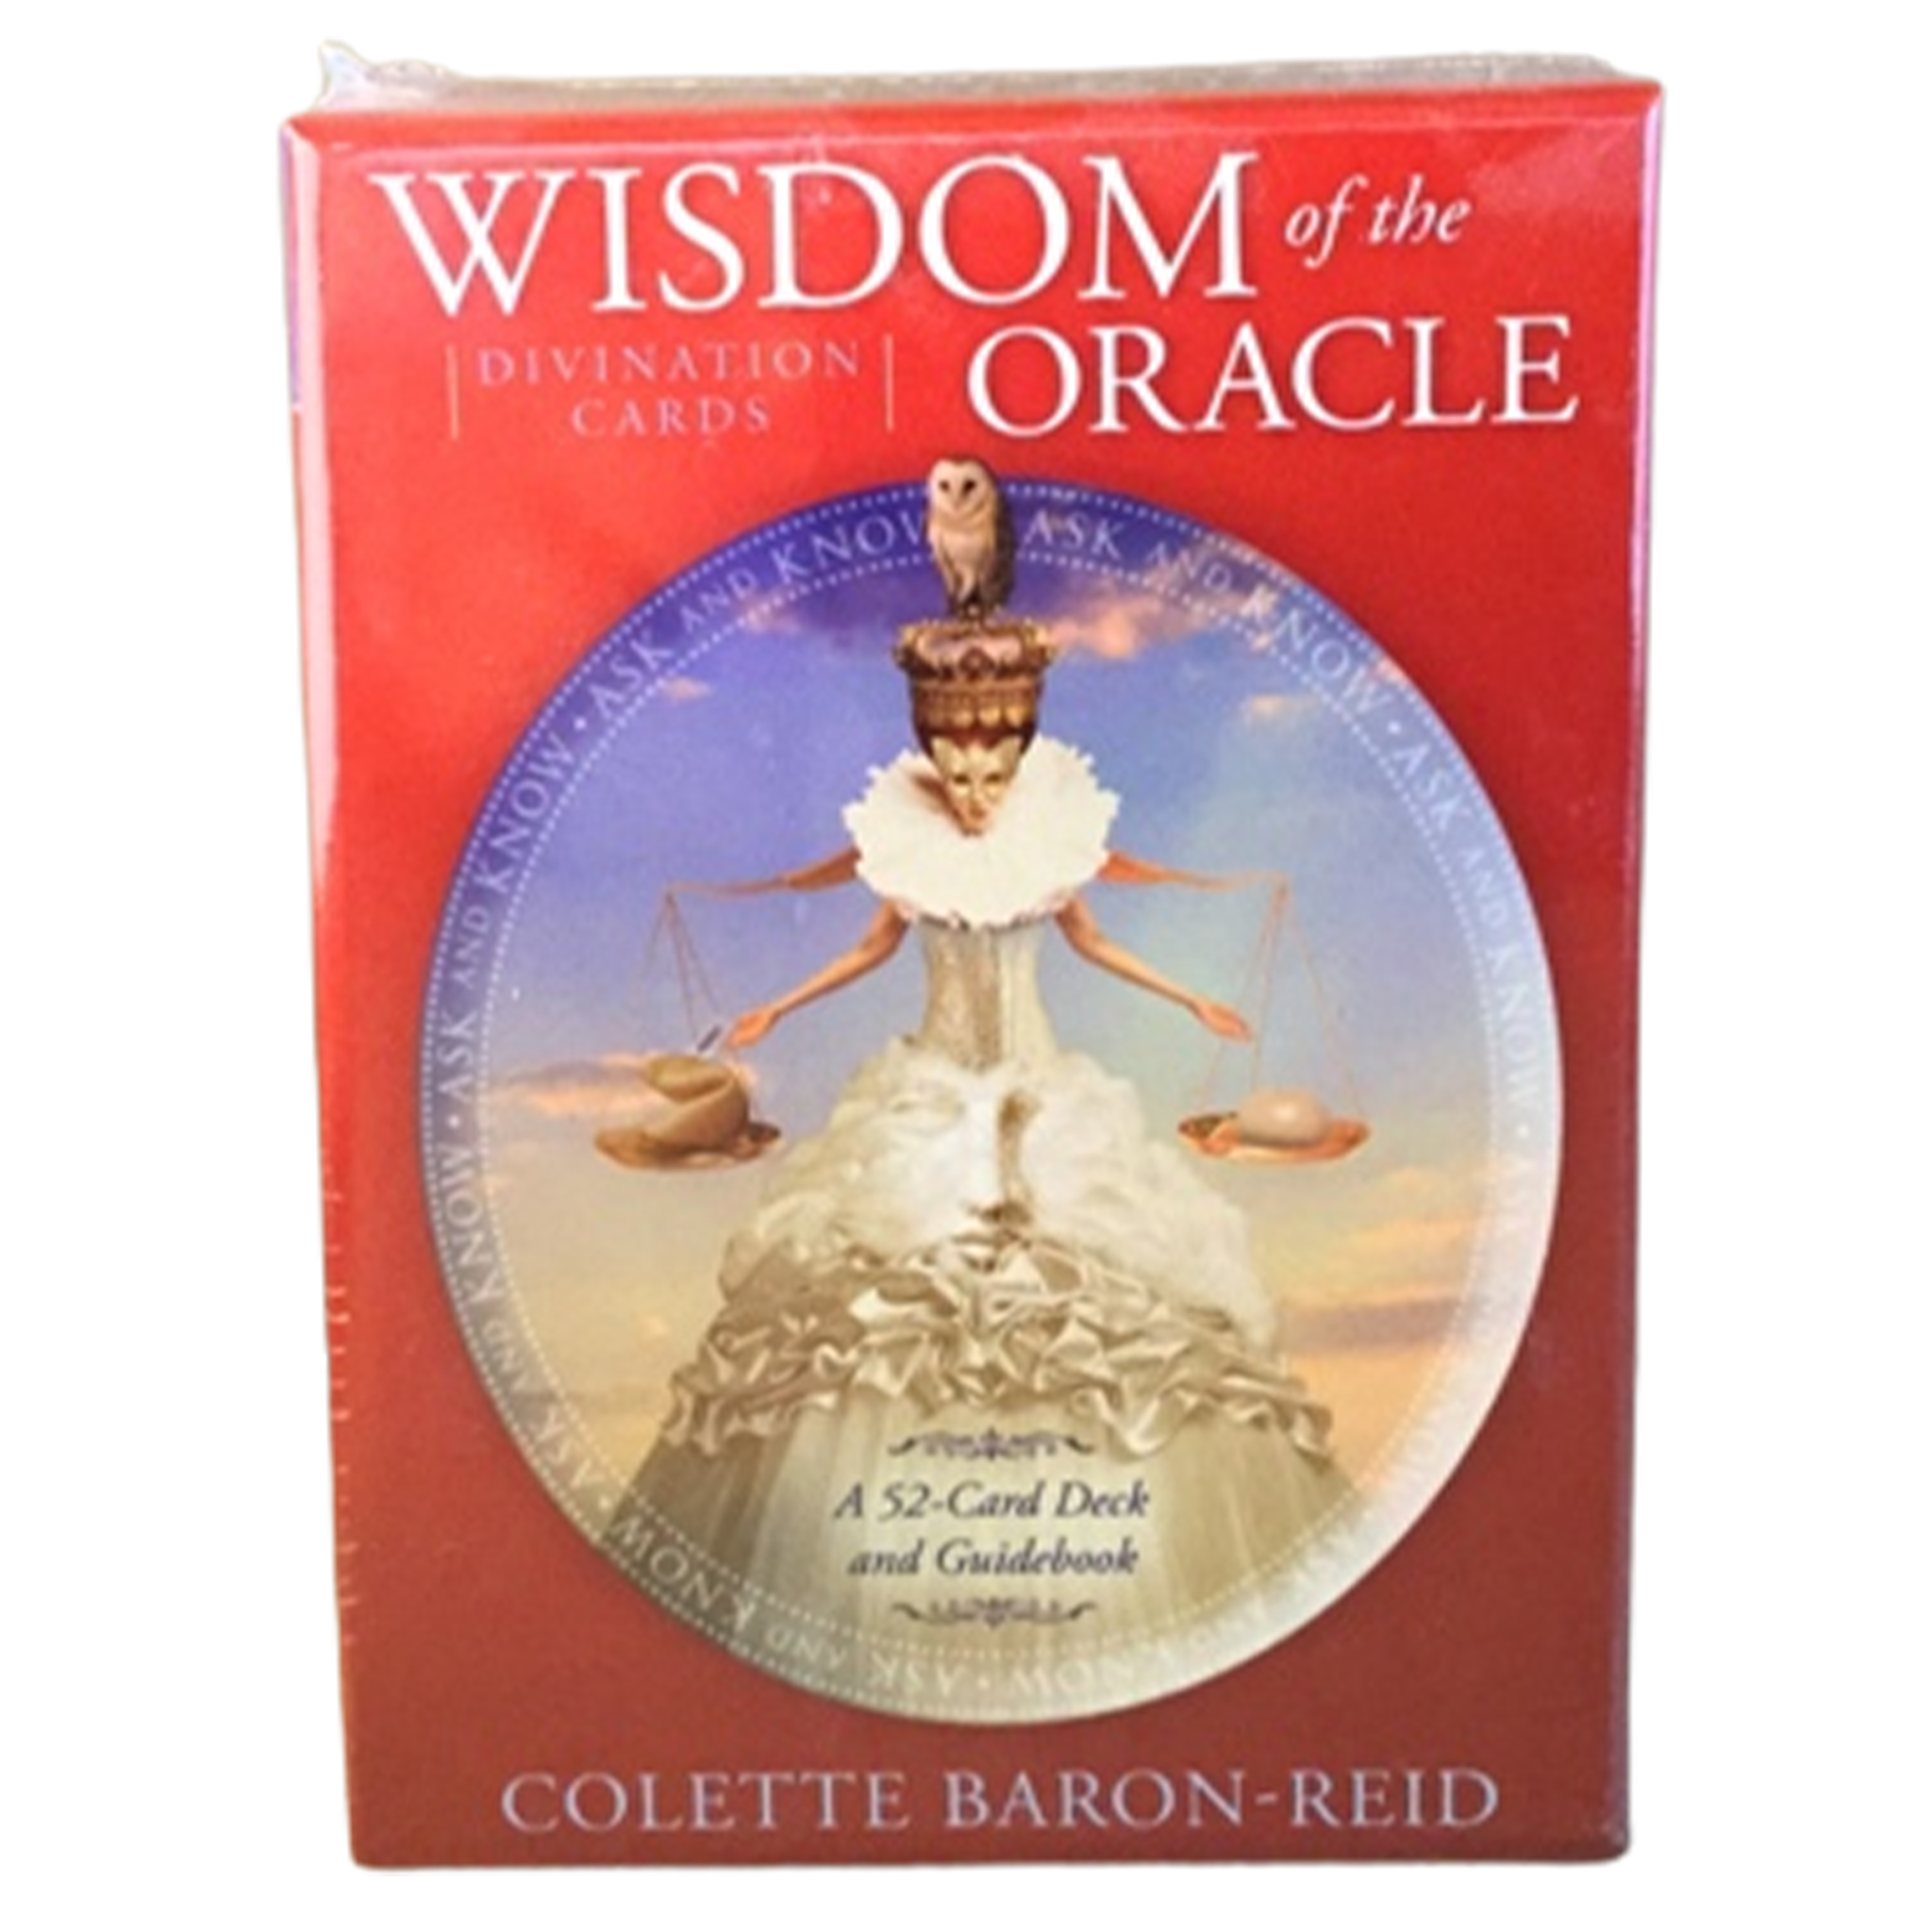 Wisdom of the Oracle Divination Card Deck